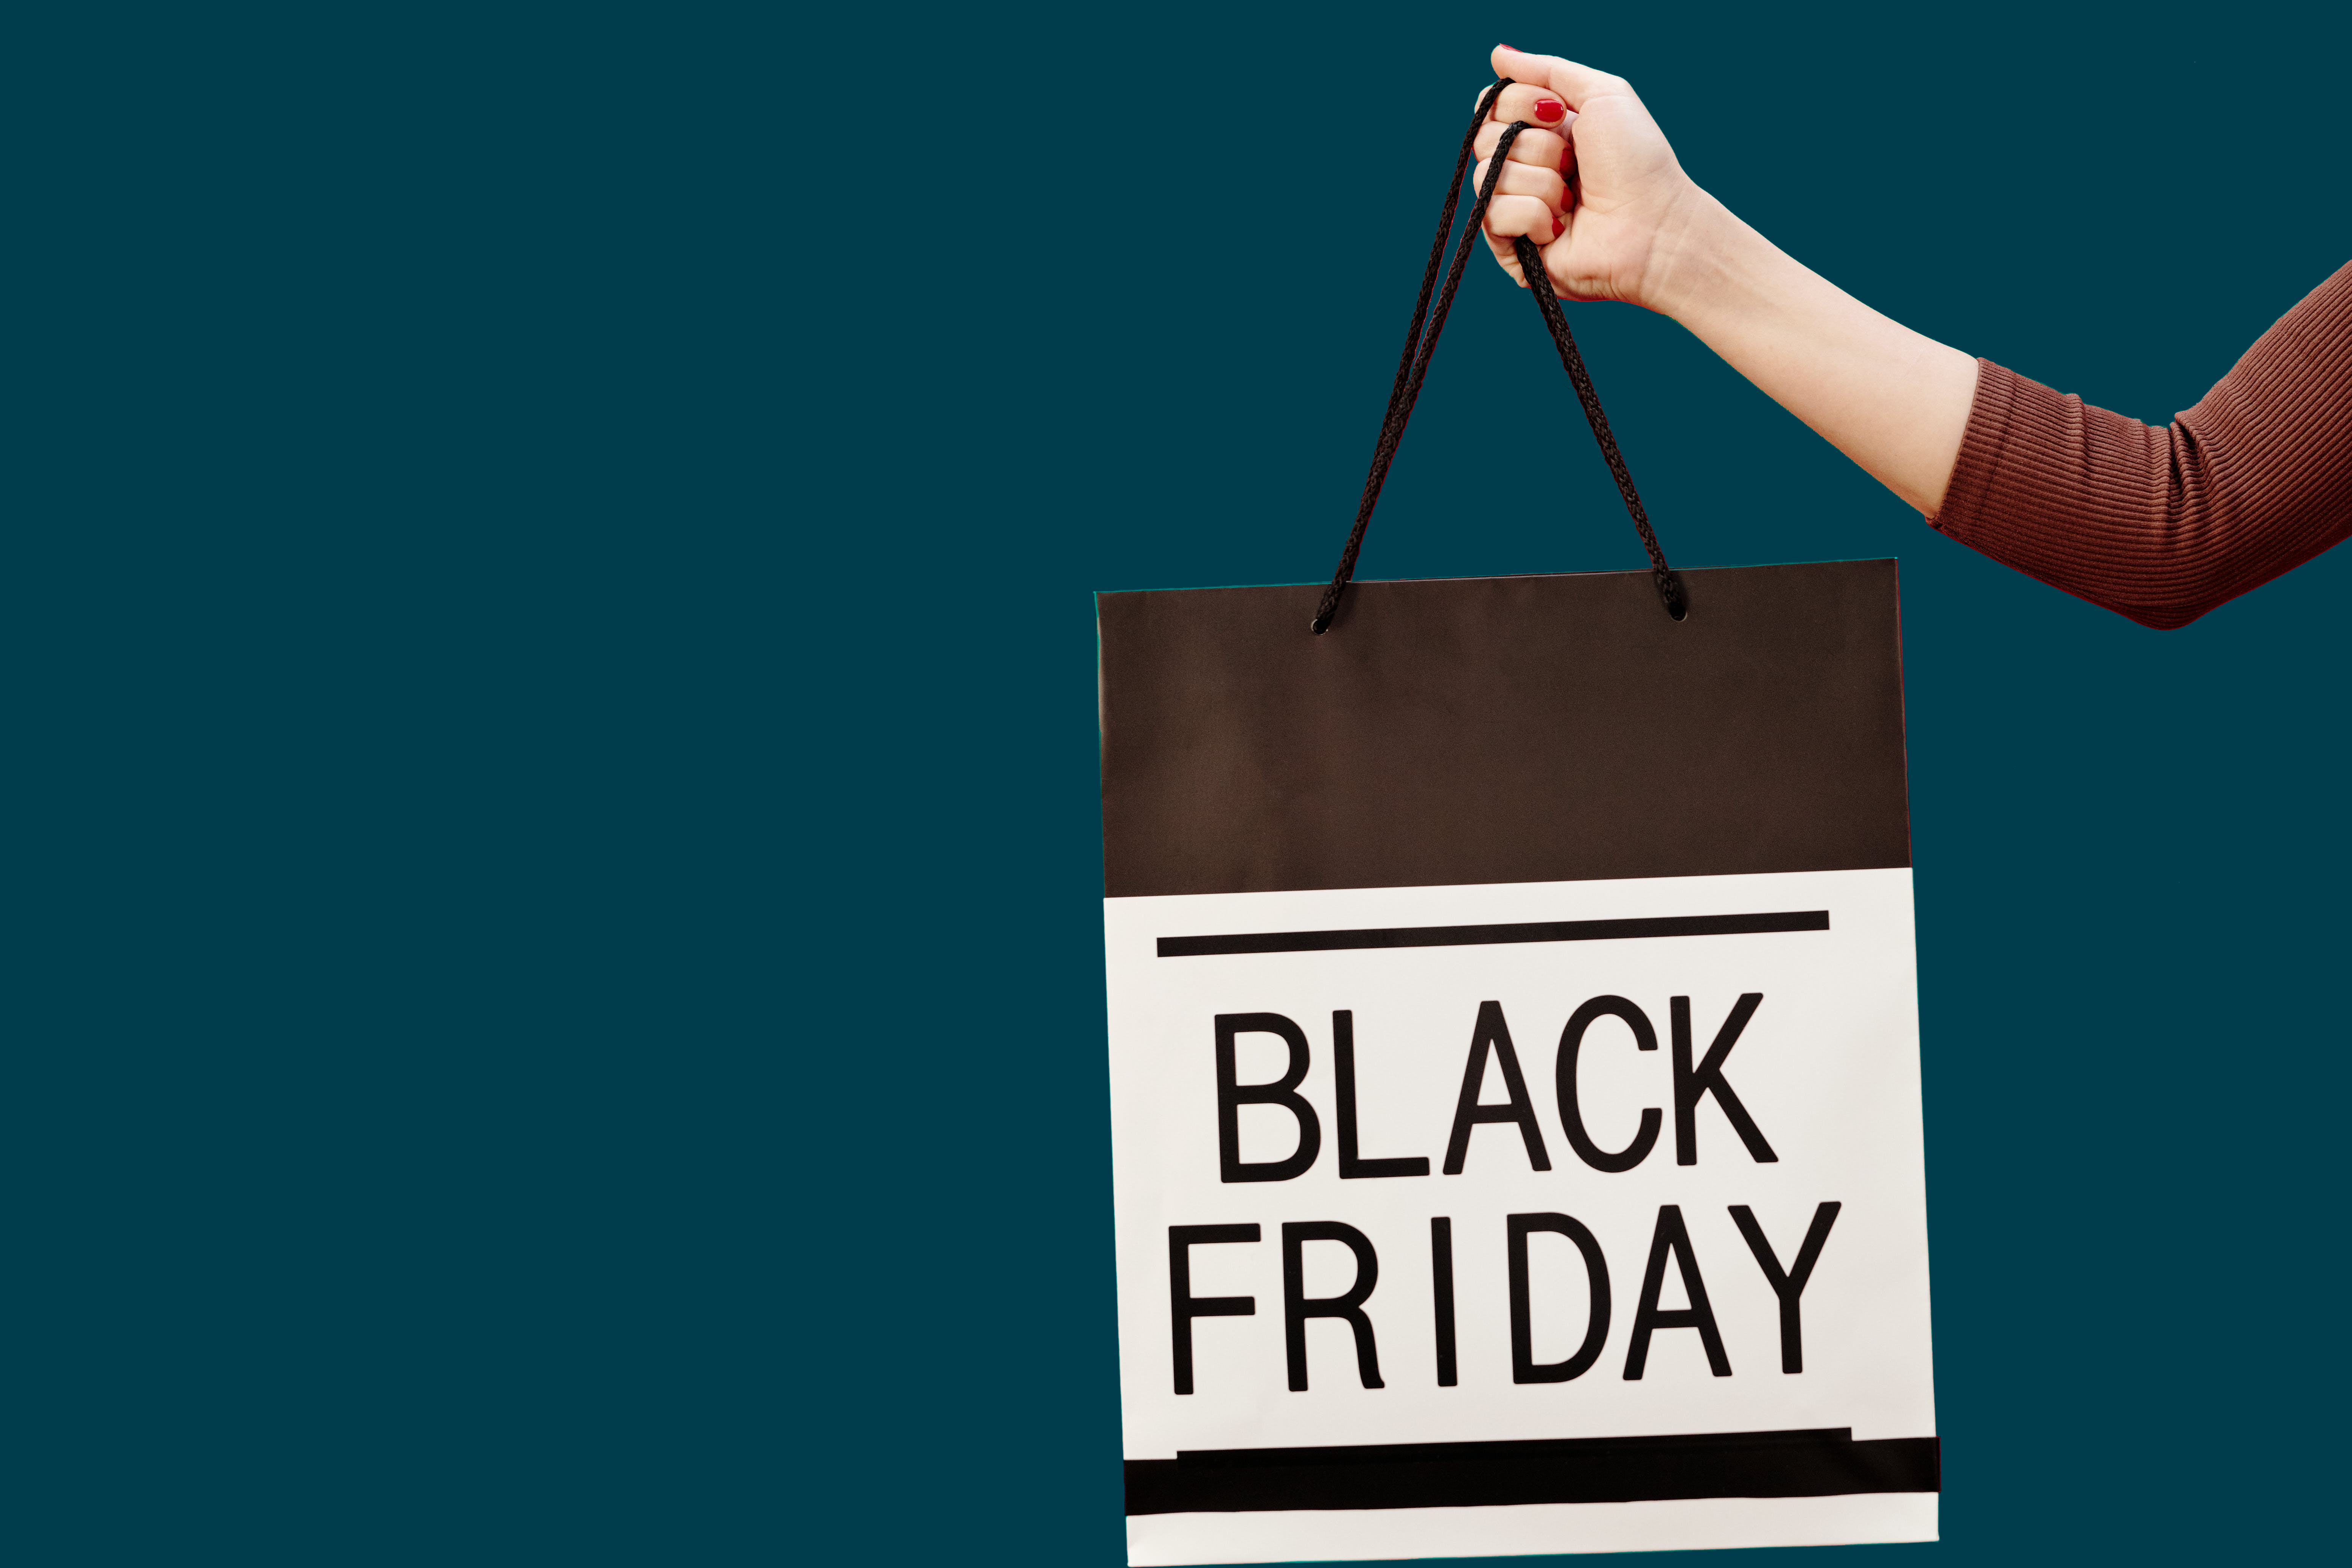 Gear up for Black Friday with MACH technology and commercetools. Learn how these innovations in e-commerce provide scalability, speed, and flexibility, ensuring your online platform can thrive during peak traffic. Elevate your customer experience and boost sales this holiday season.